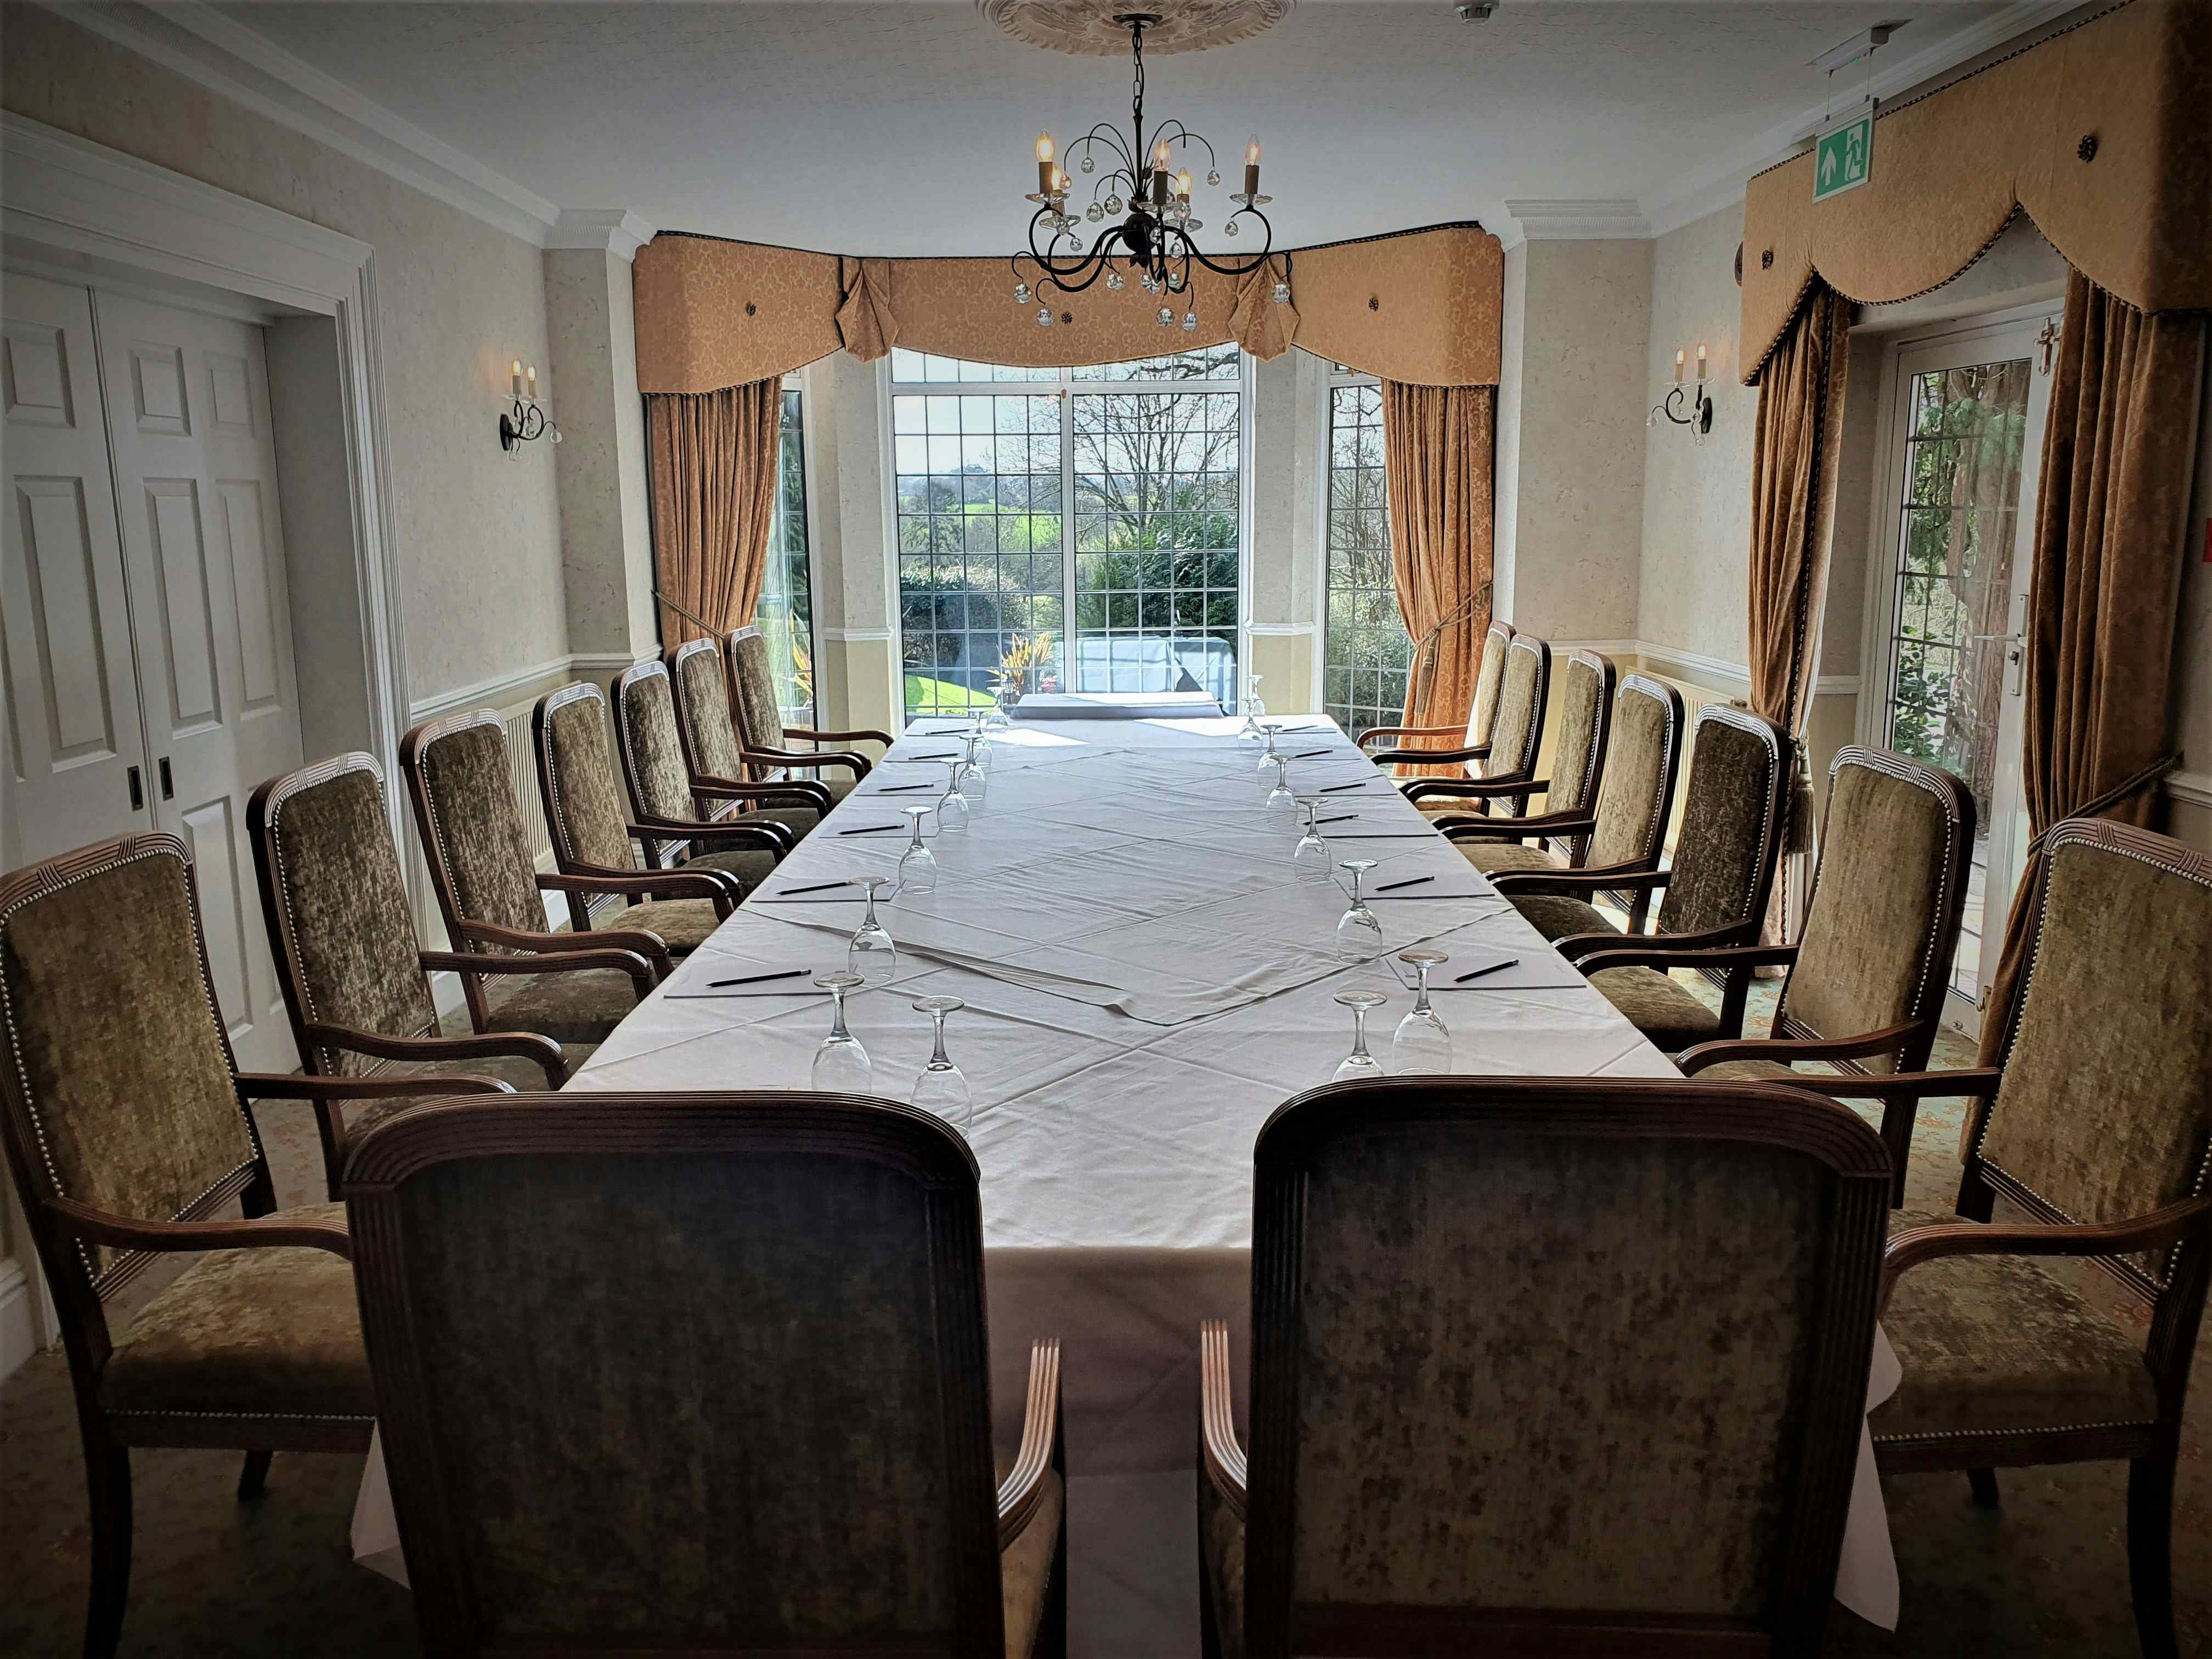 Earlswood Suite, Nuthurst Grange Country House Hotel & Restaurant